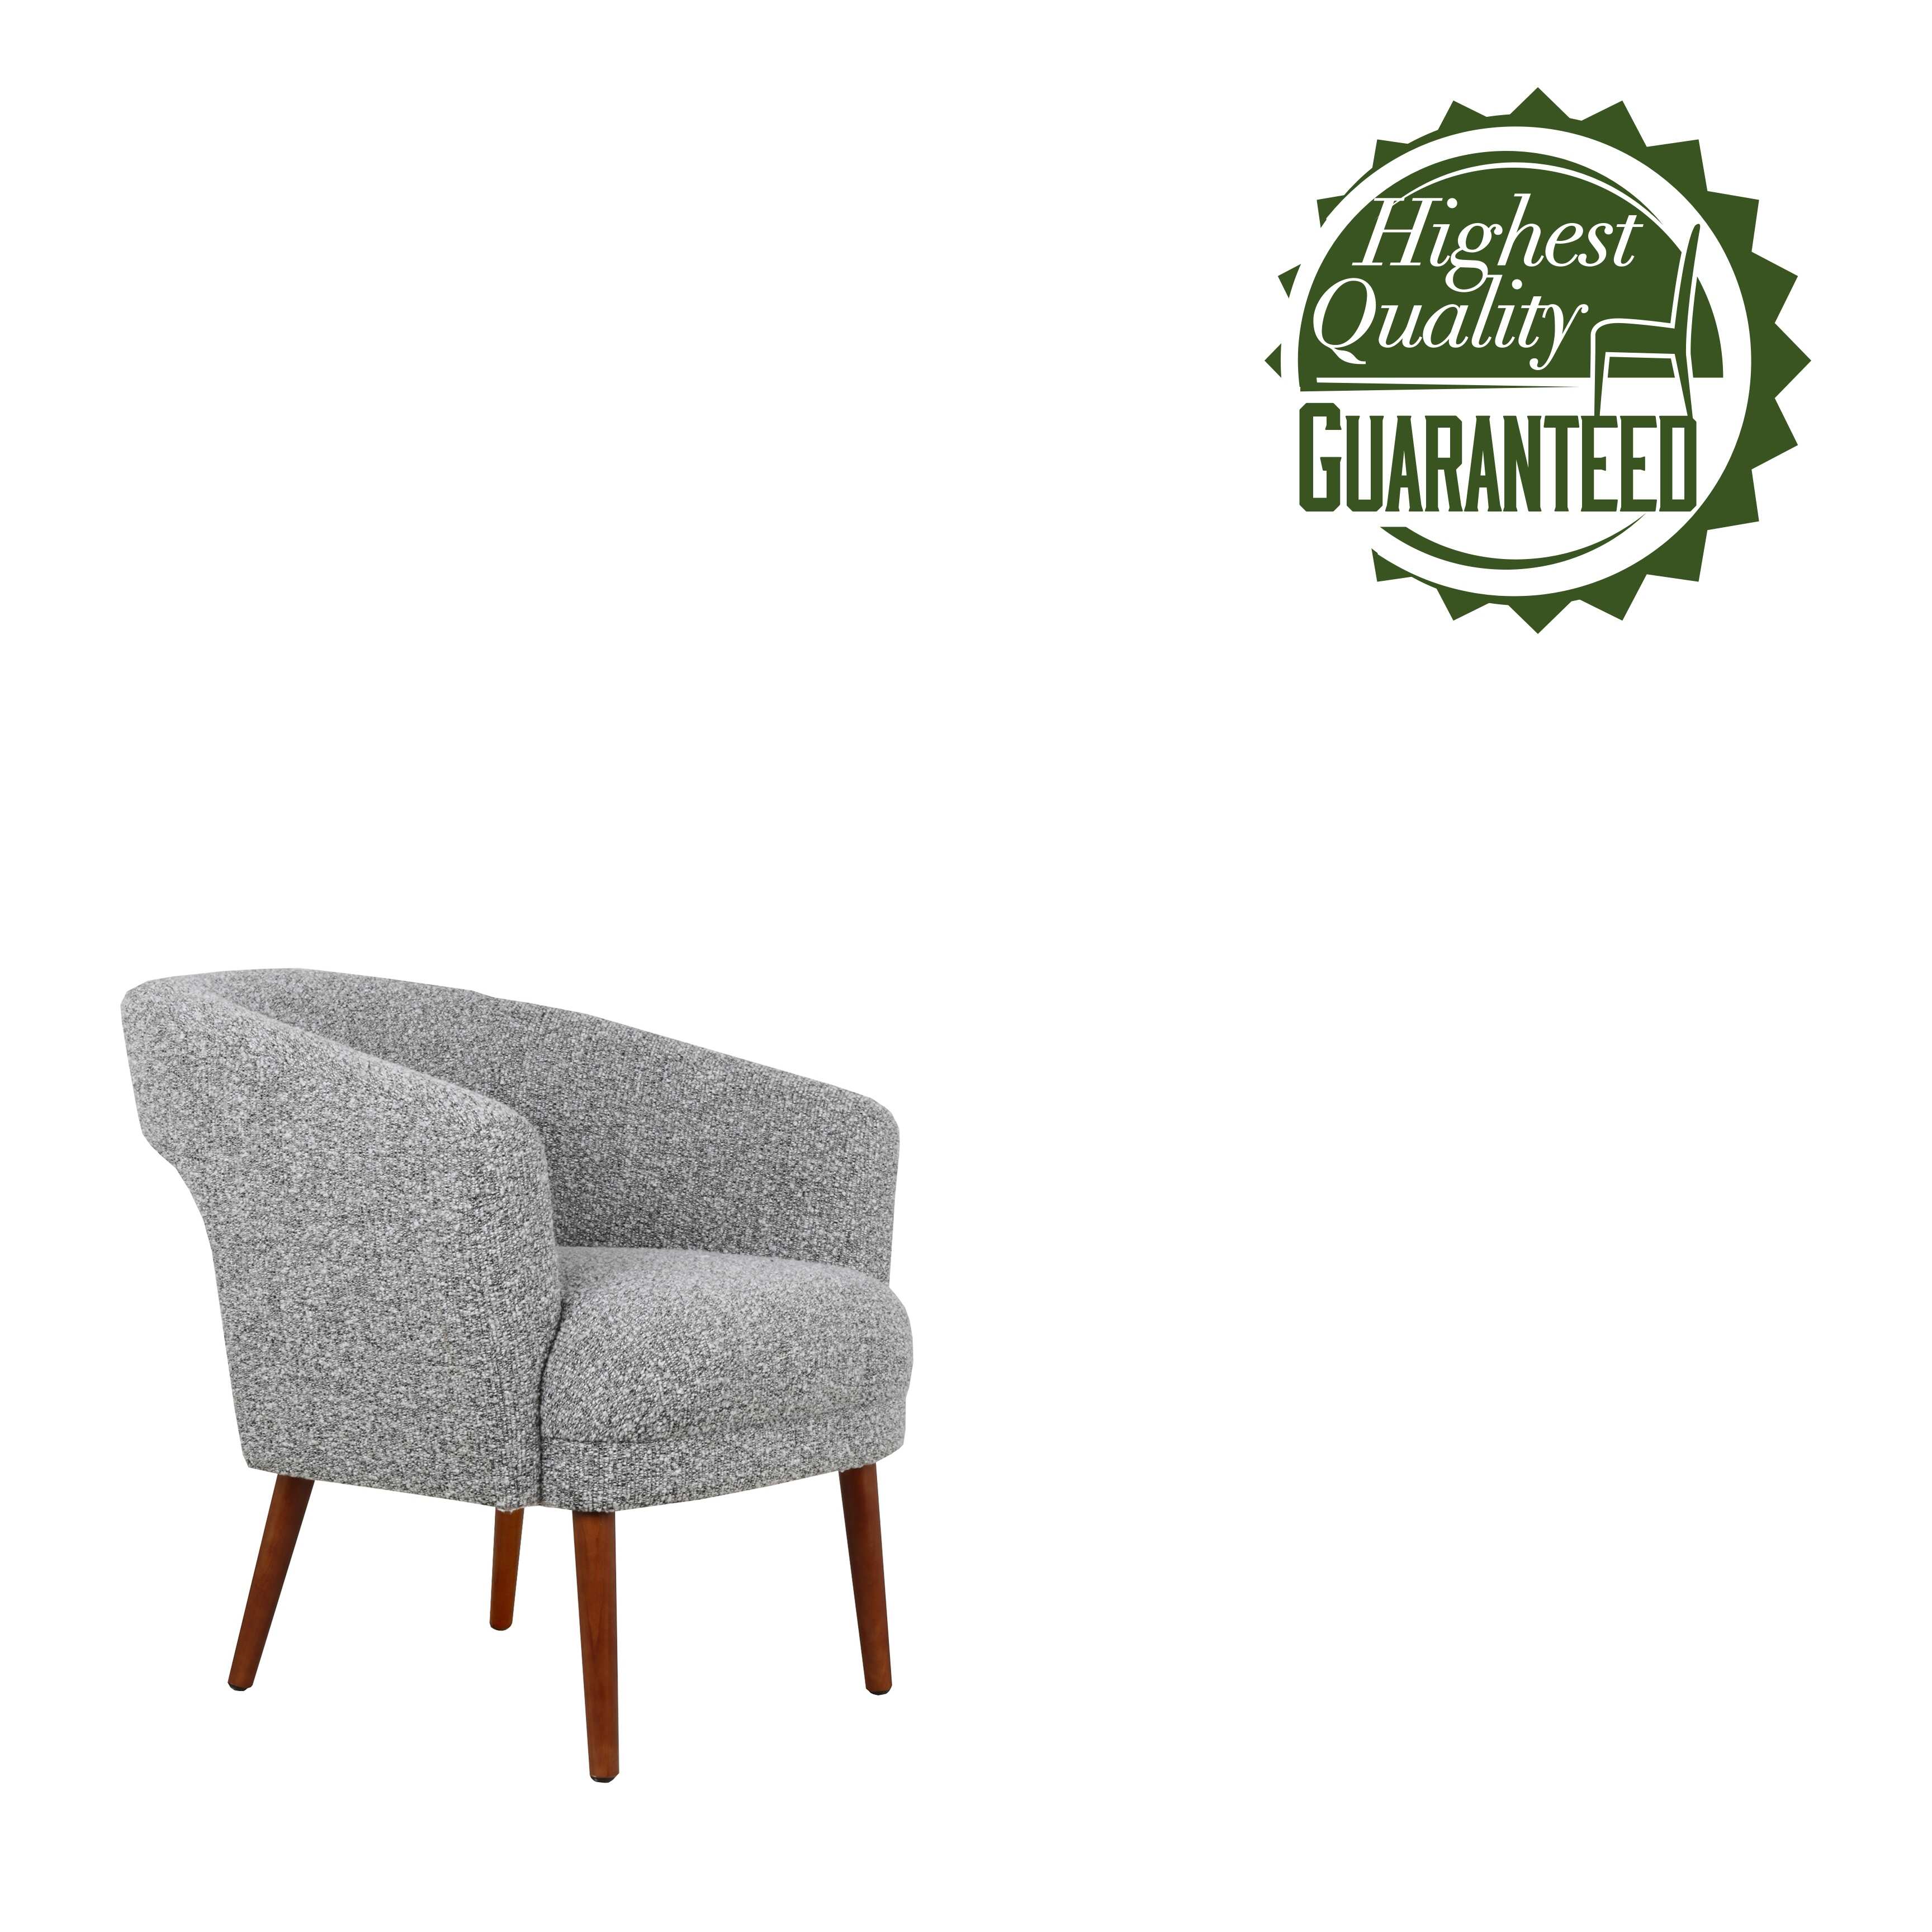 Porthos Home Rudi Sherpa Fabric Accent Chair with Rubberwood Legs